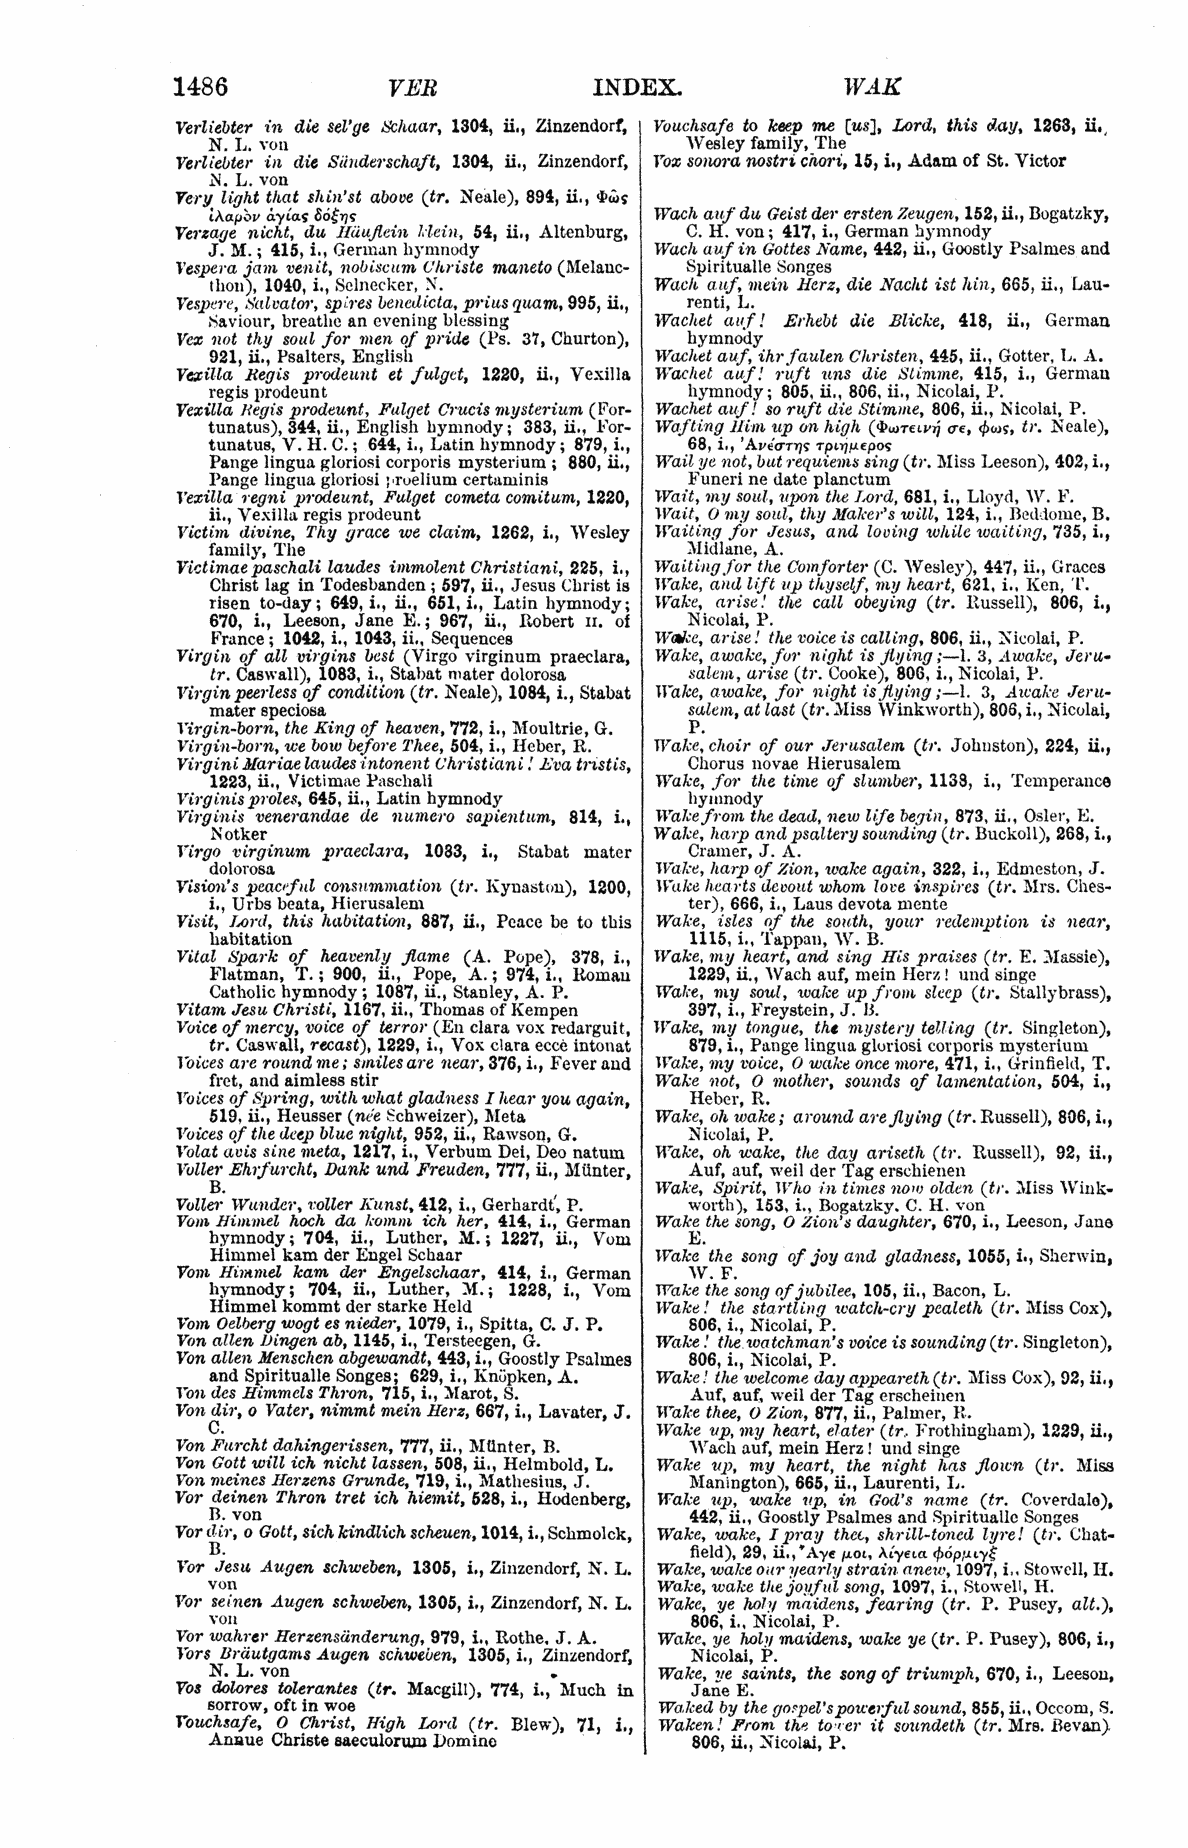 Image of page 1486